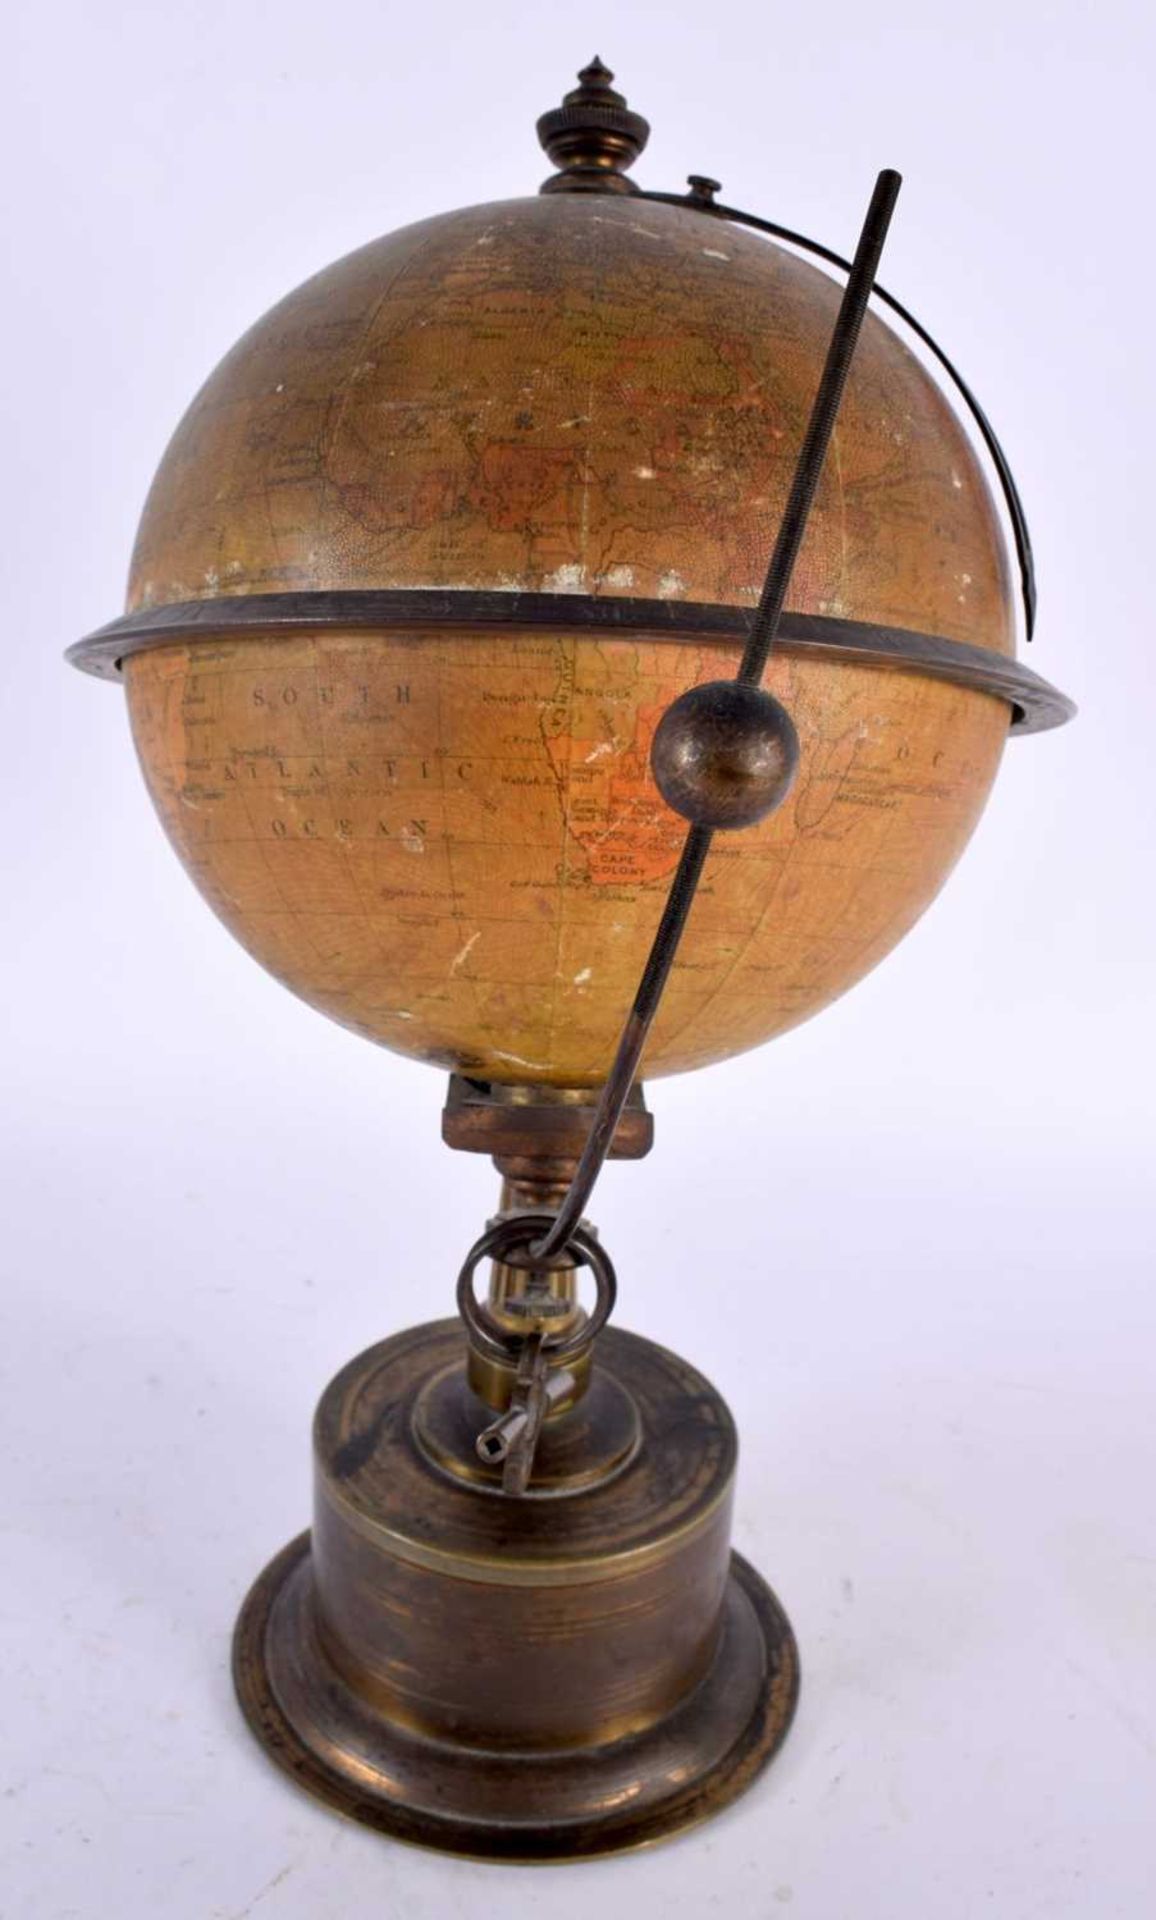 A LATE 19TH CENTURY THE EMPIRE GLOBE CLOCK, PATENT 19460 An 6-inch diameter terrestrial globe, - Image 3 of 6